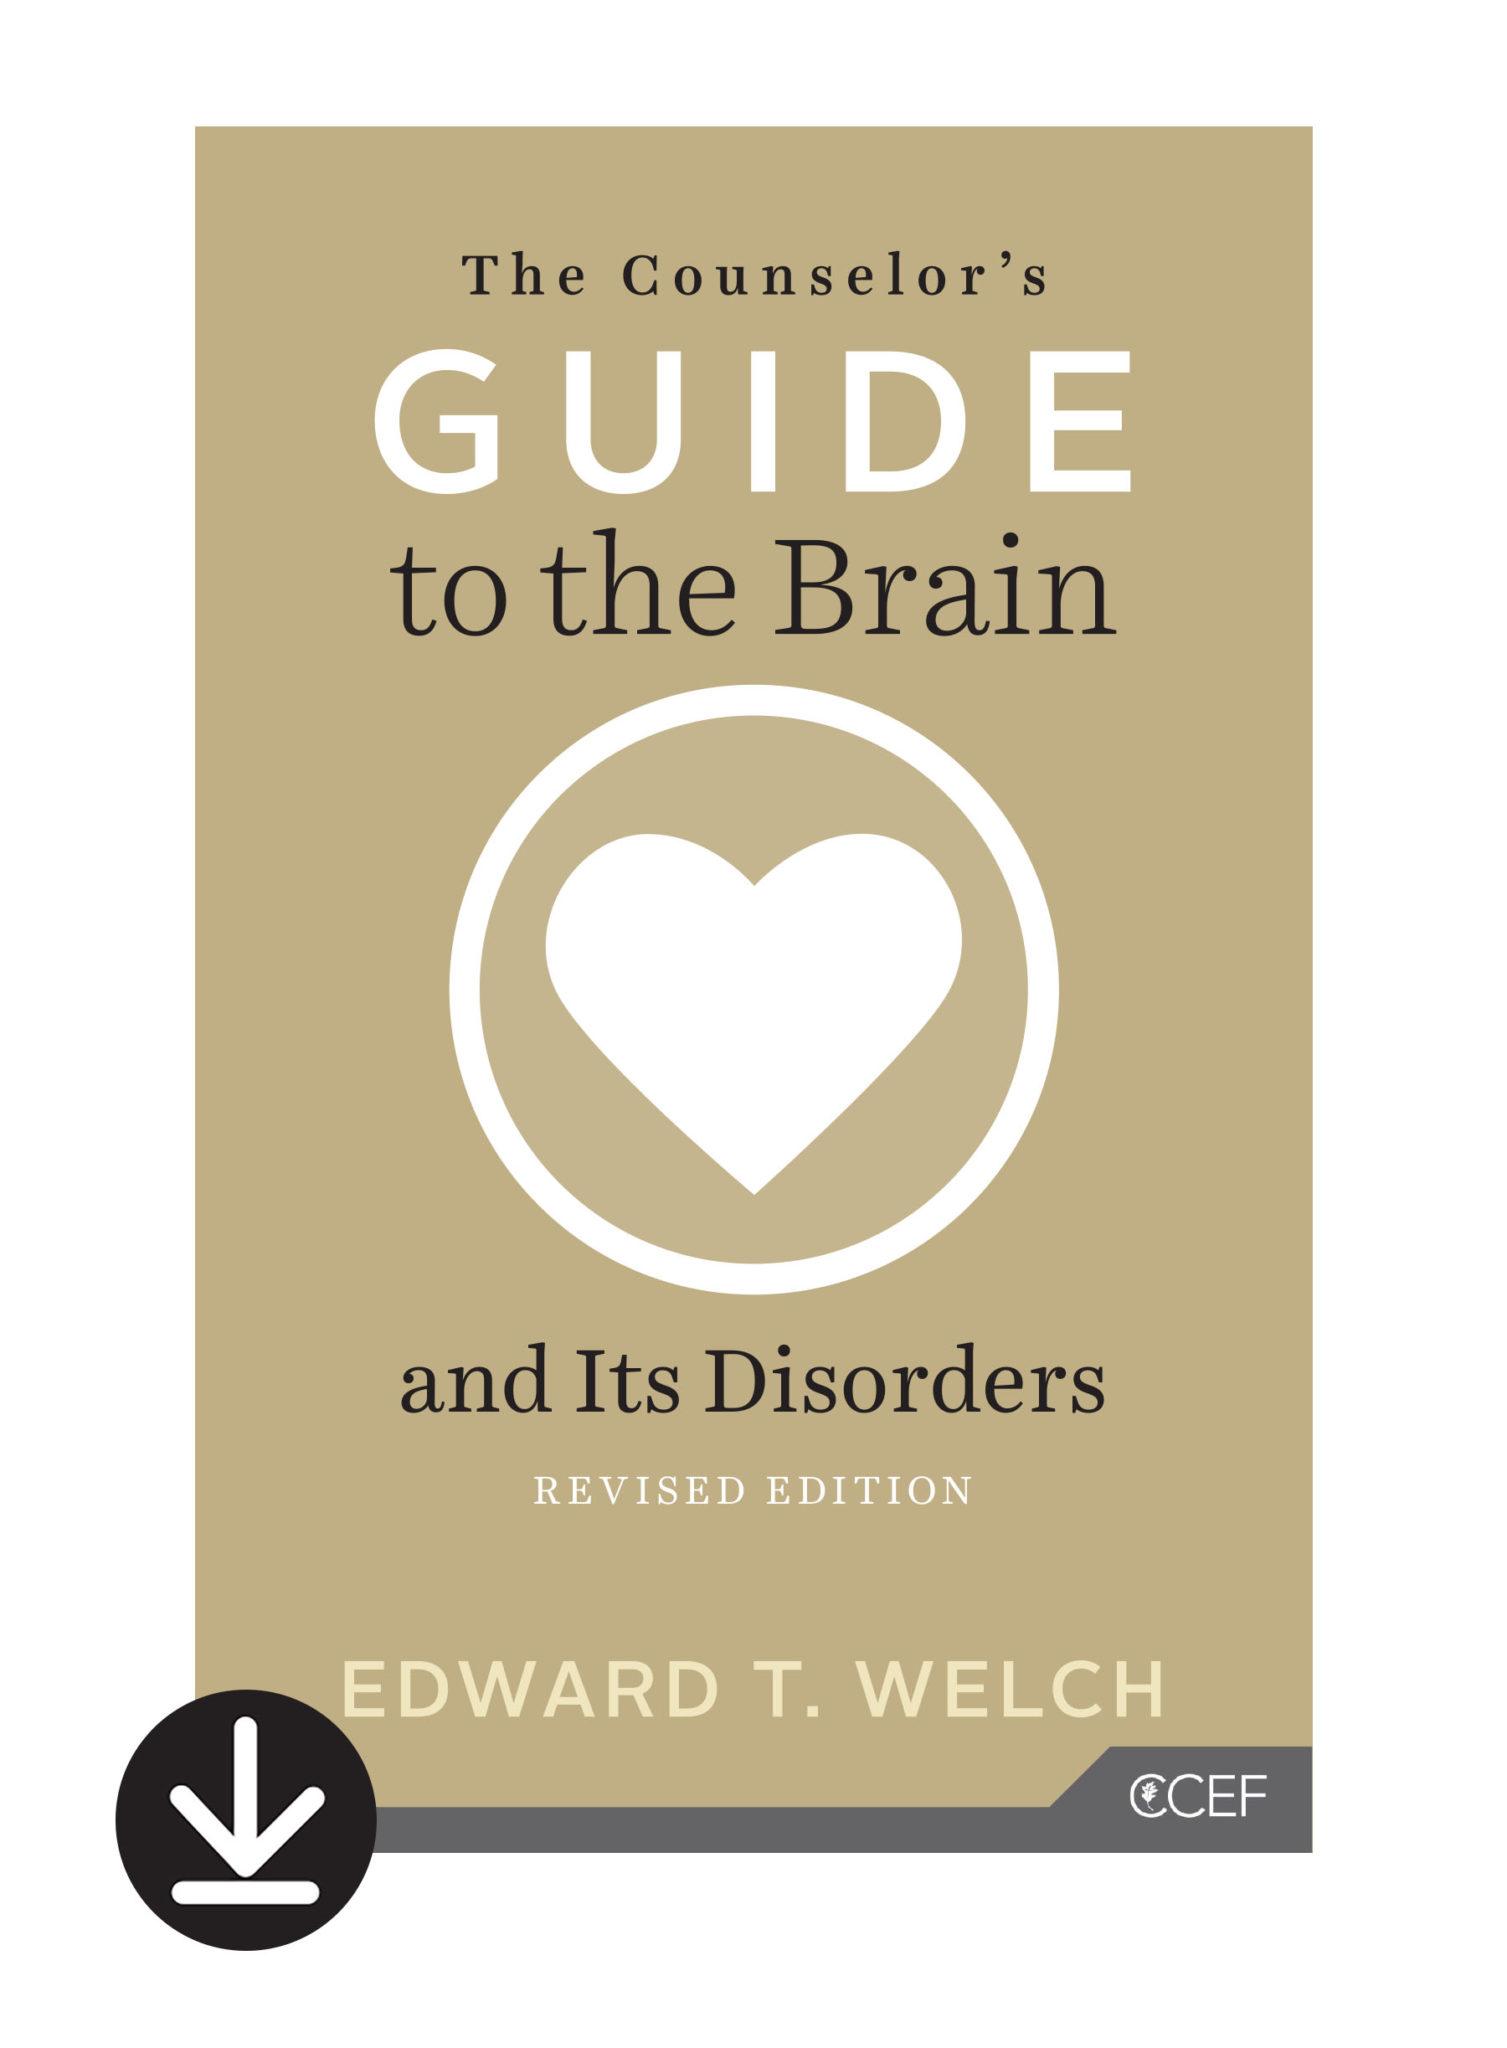 Featured image for The Counselor's Guide to the Brain and Its Disorders